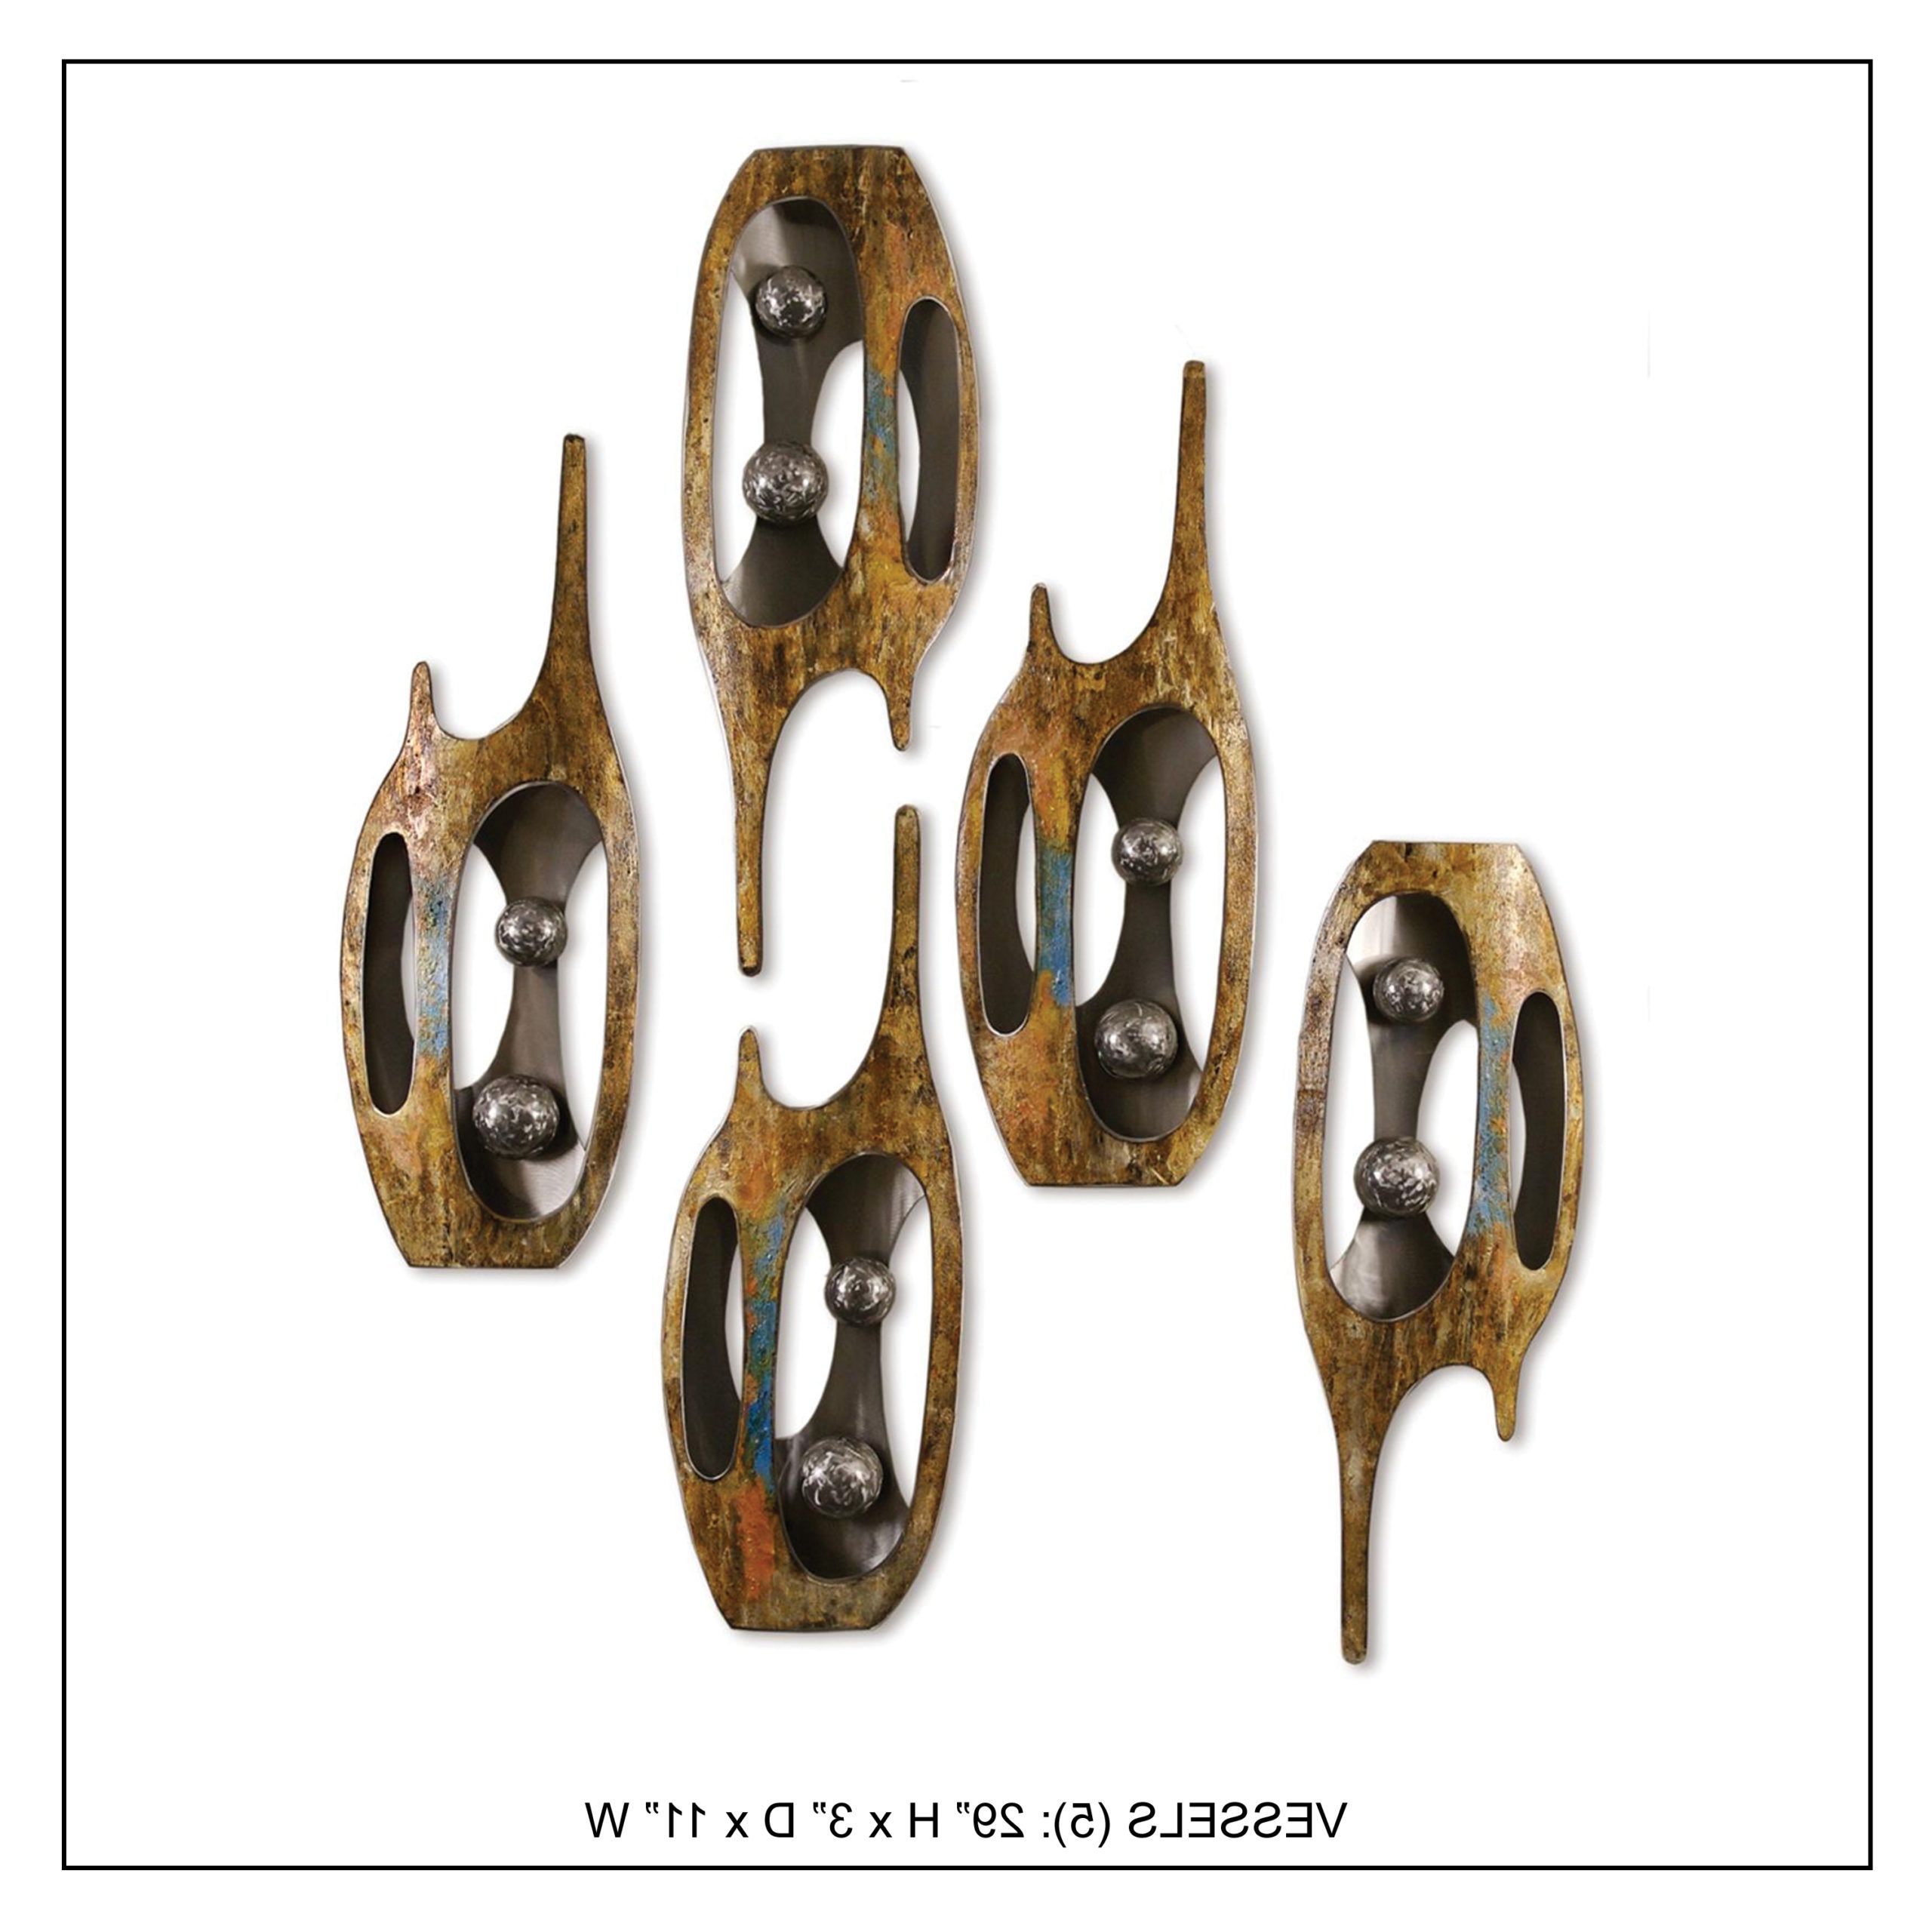 Current Handcrafted Metal Wall Décor Throughout Vessels (5) – Handcrafted Metal Wall Decor – Innomax (View 11 of 20)